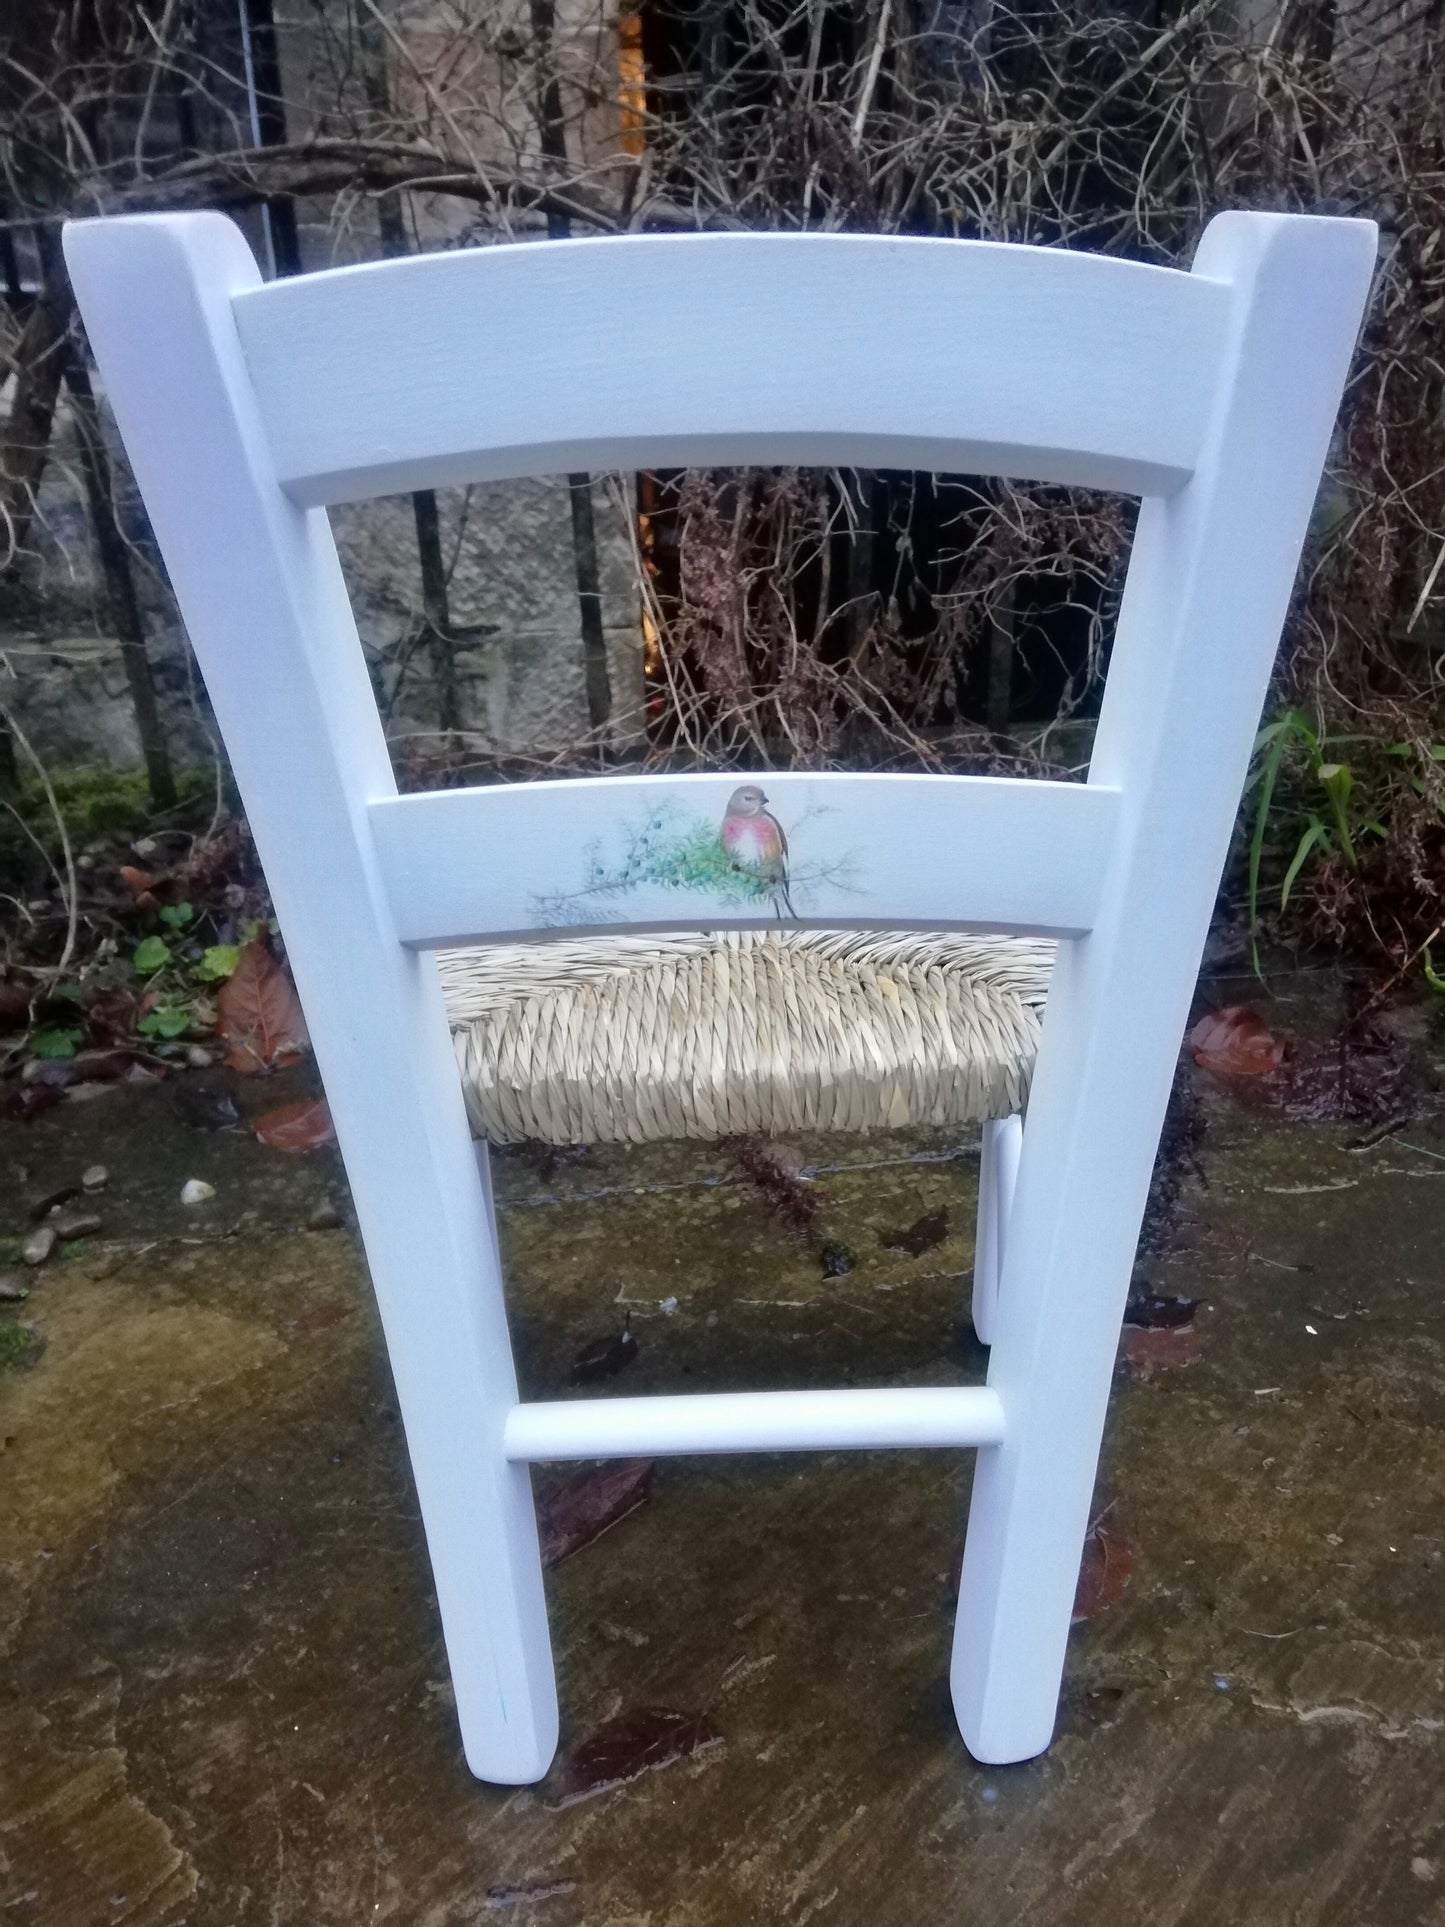 Rush seat personalised children's chair - birds on branches theme - made to order